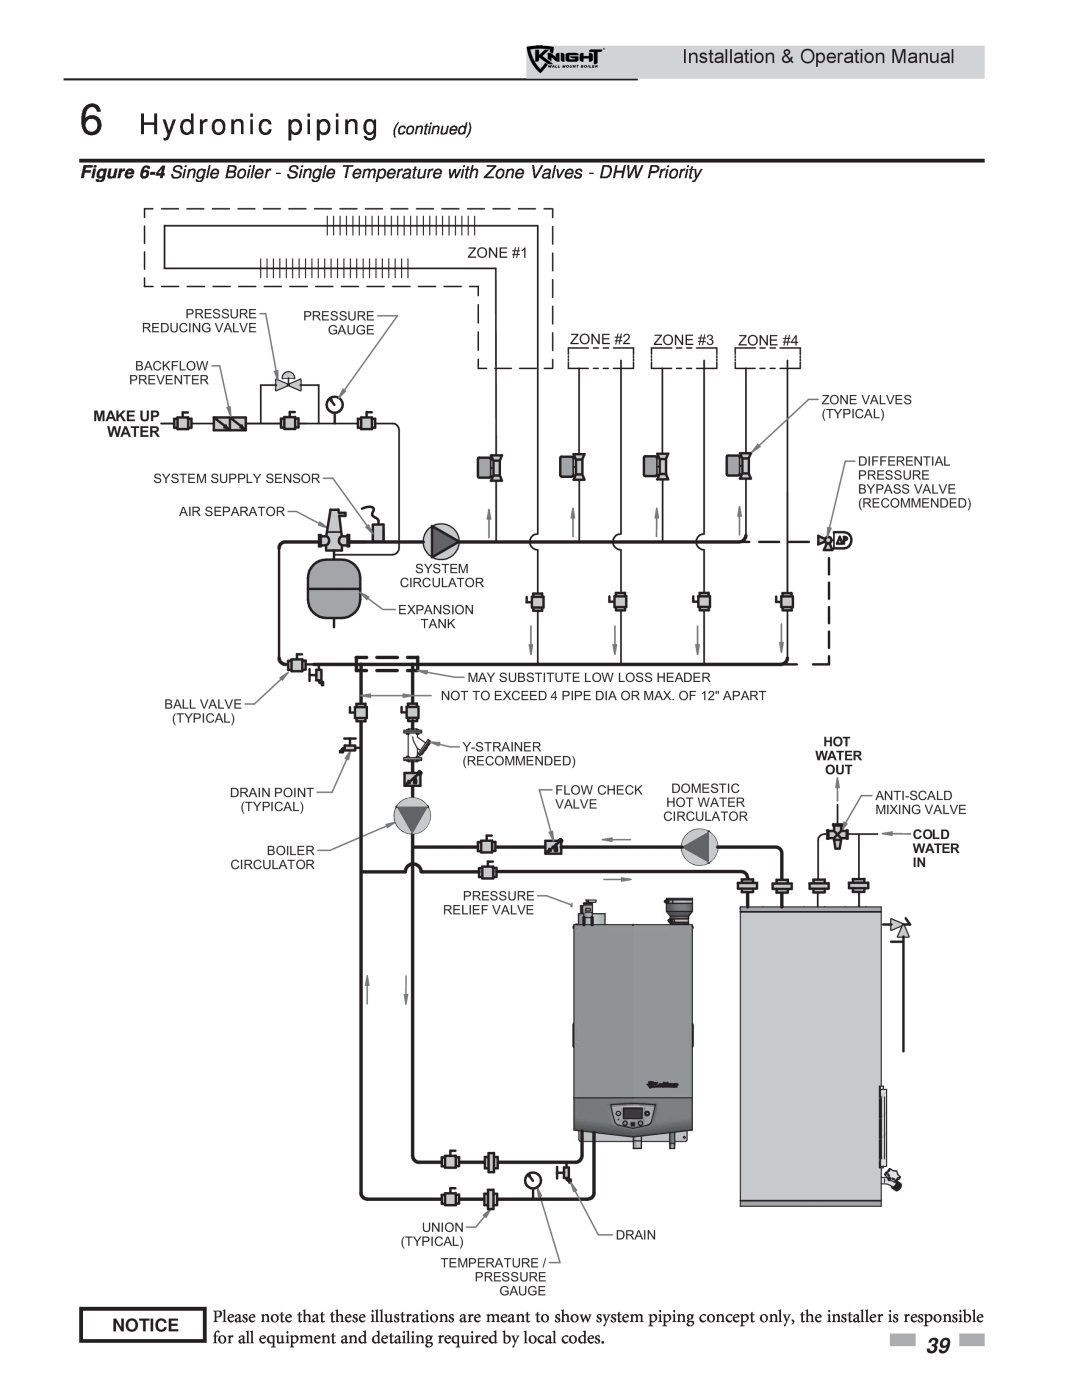 Lochinvar WH 55-399 Hydronic piping continued, Installation & Operation Manual, Notice, ZONE #1, ZONE #3, ZONE #2, Make Up 